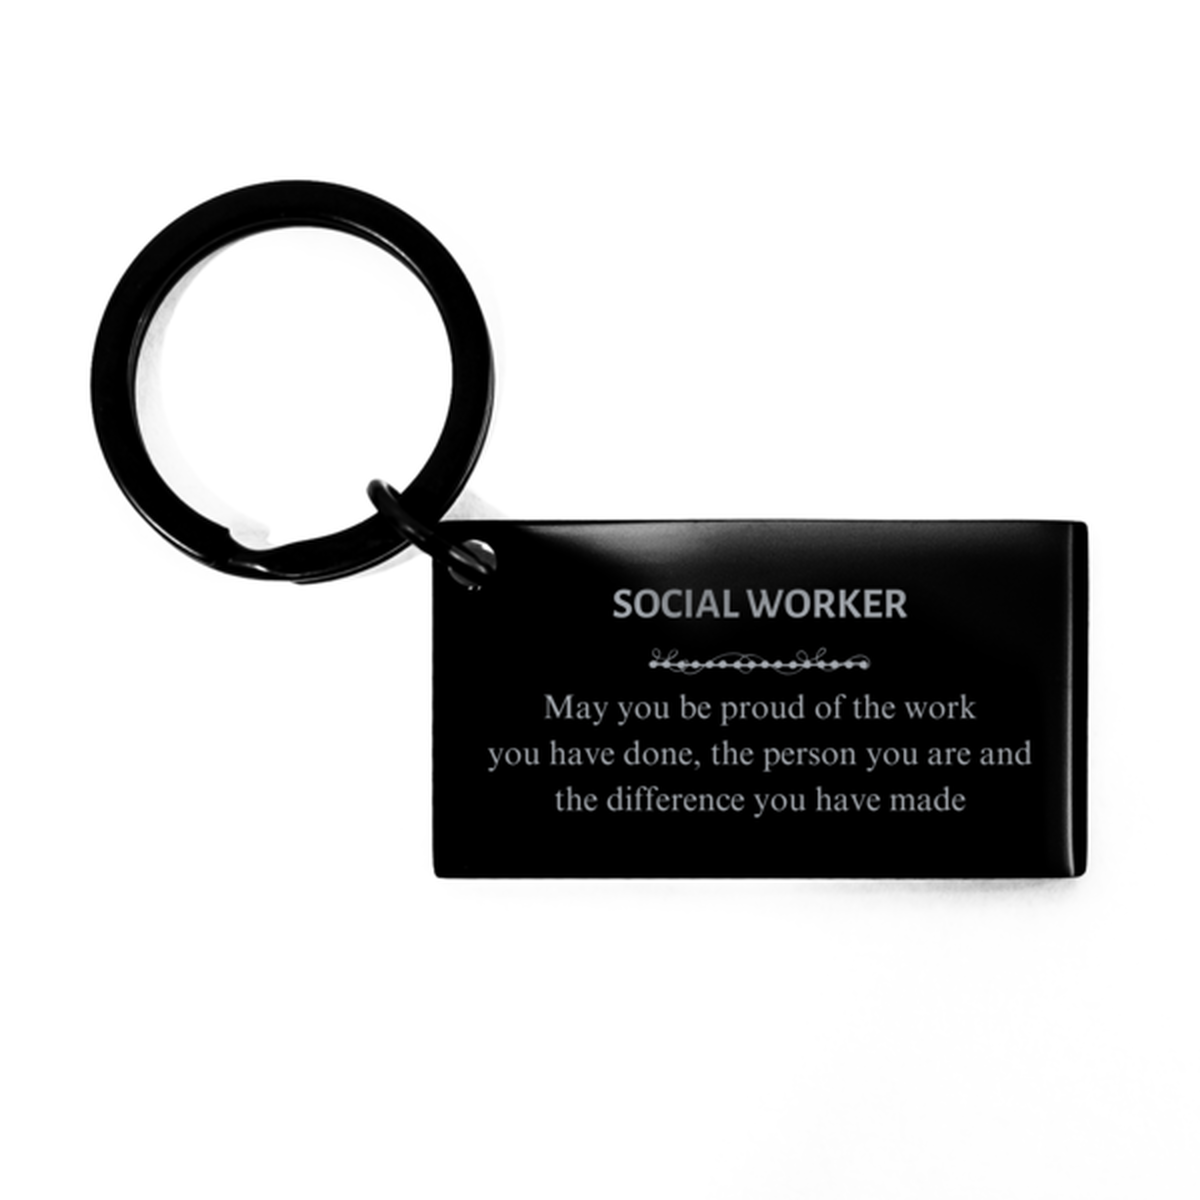 Waiter May you be proud of the work you have done, Retirement Social Worker Keychain for Colleague Appreciation Gifts Amazing for Social Worker